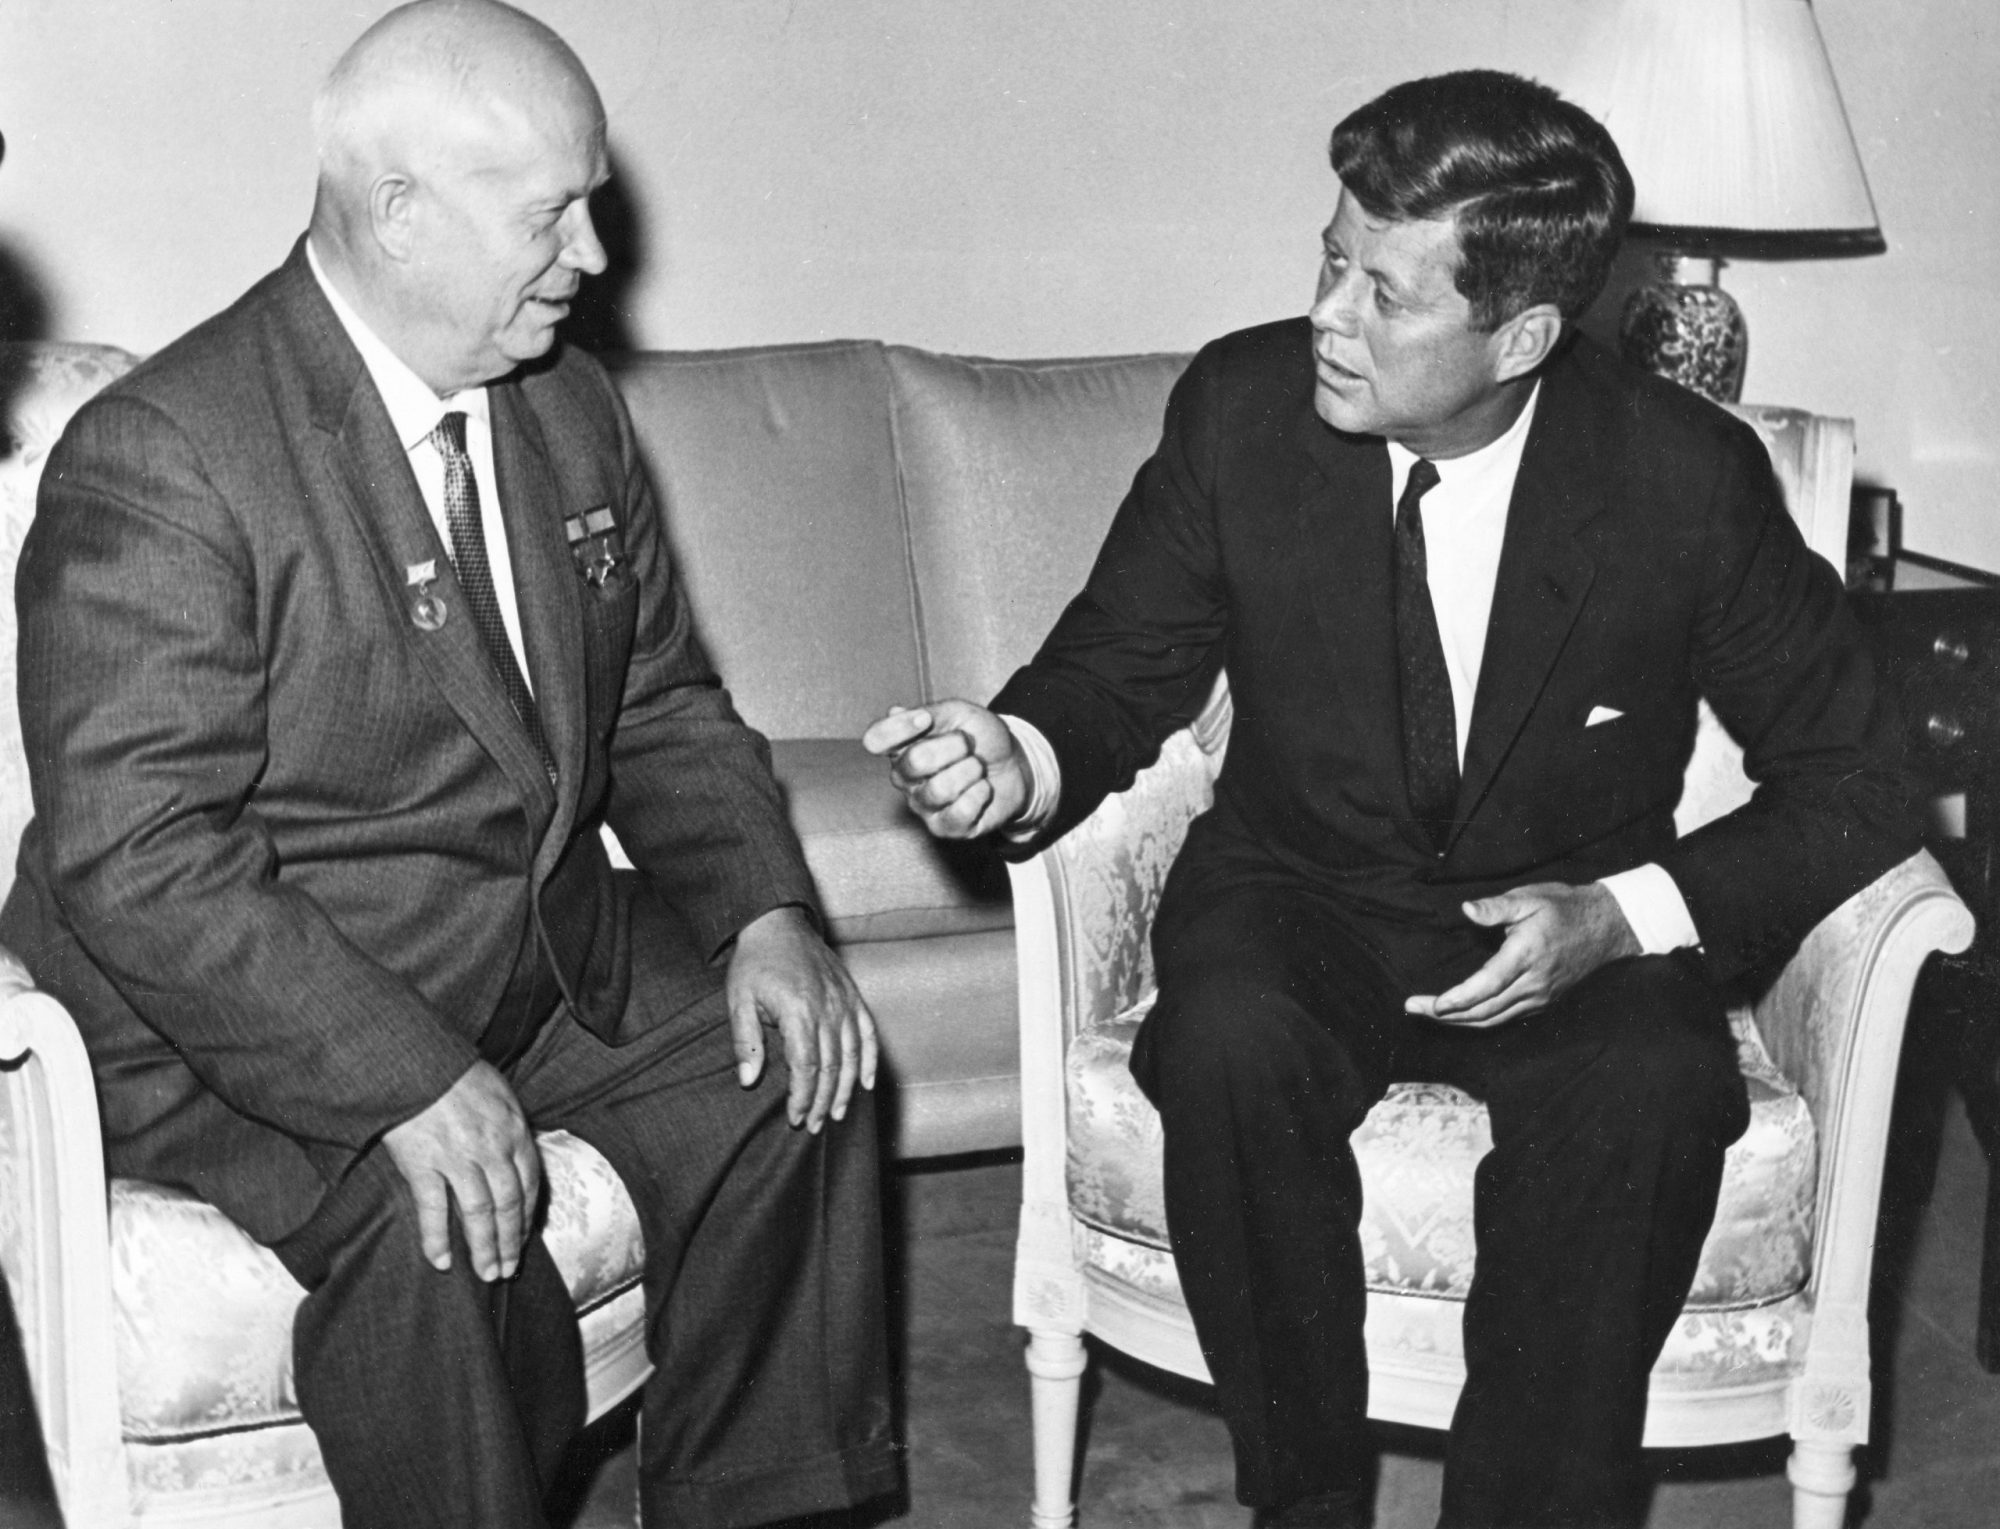 JFK and the Cuban Missile Crisis: Lessons for Diplomacy Today